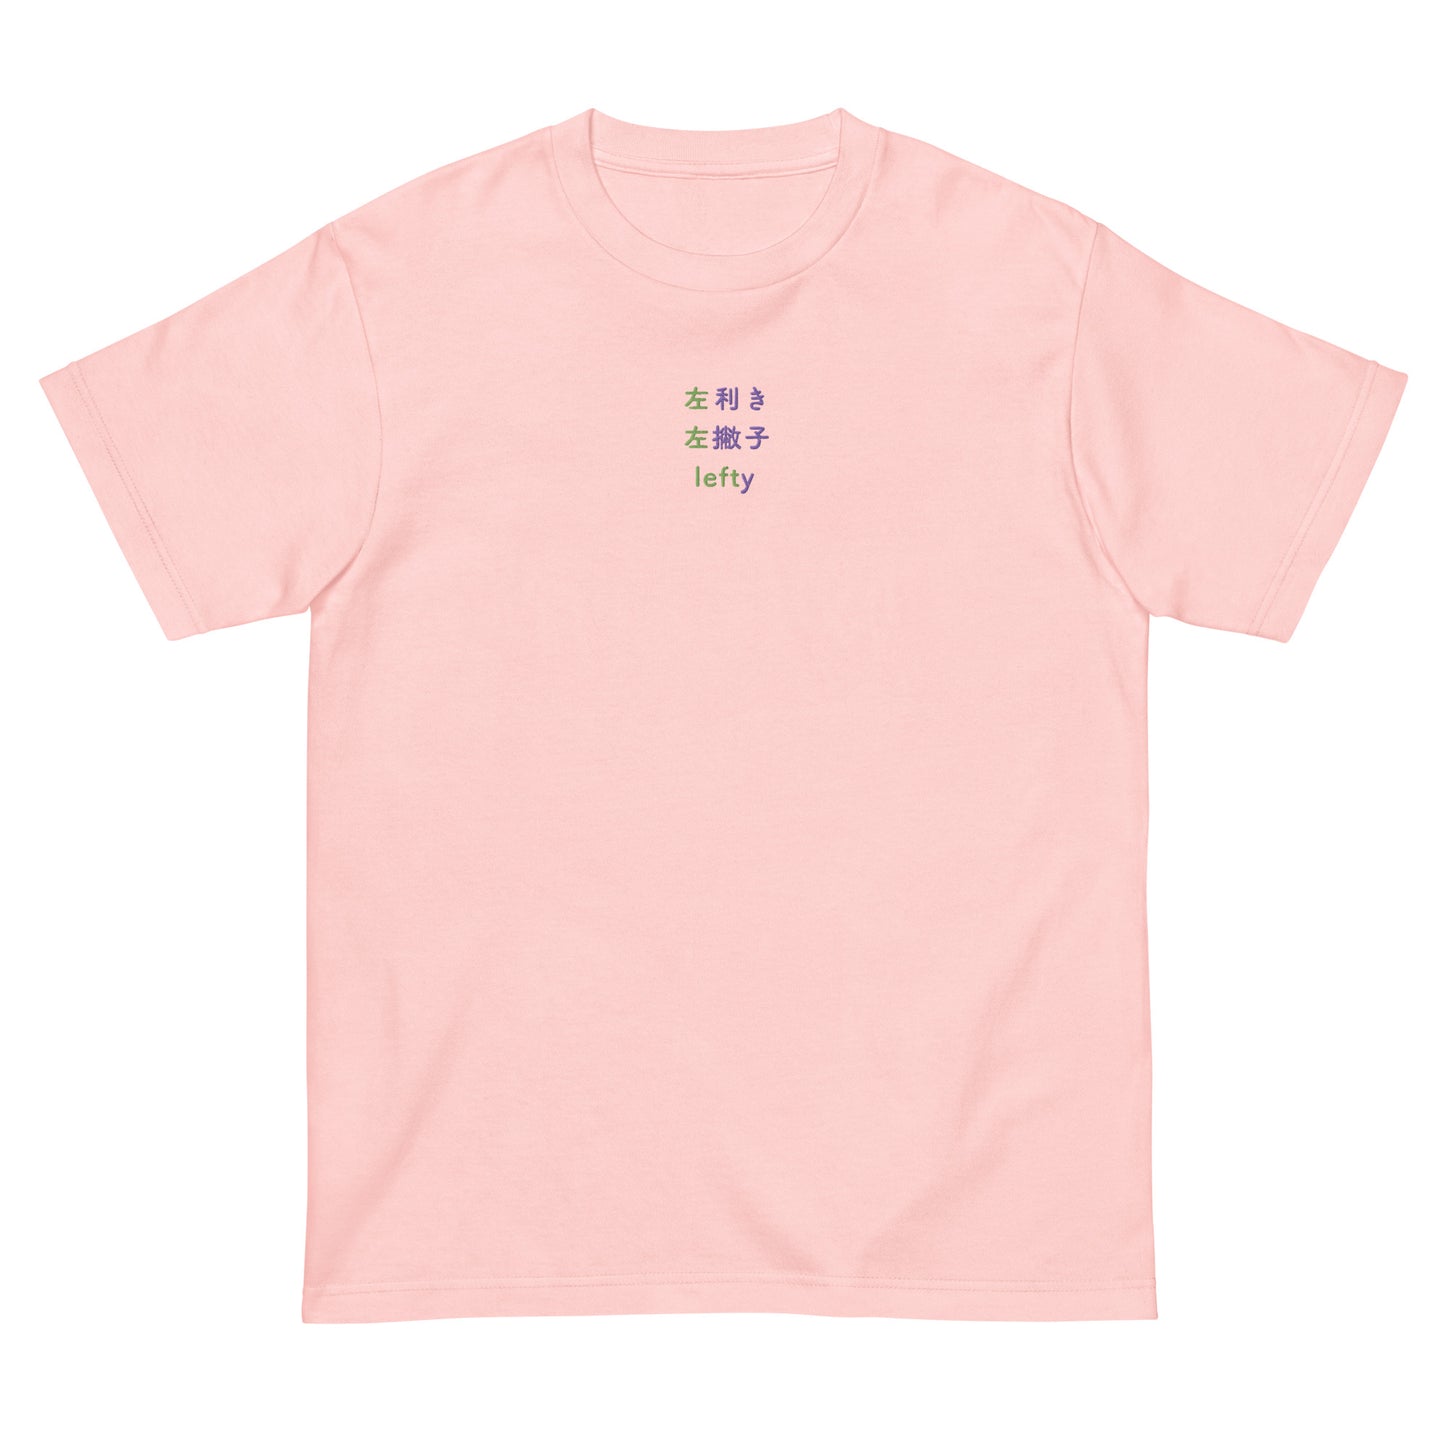 Pink High Quality Tee - Front Design with an Green, Purple Embroidery "Lefty" in Japanese,Chinese and English